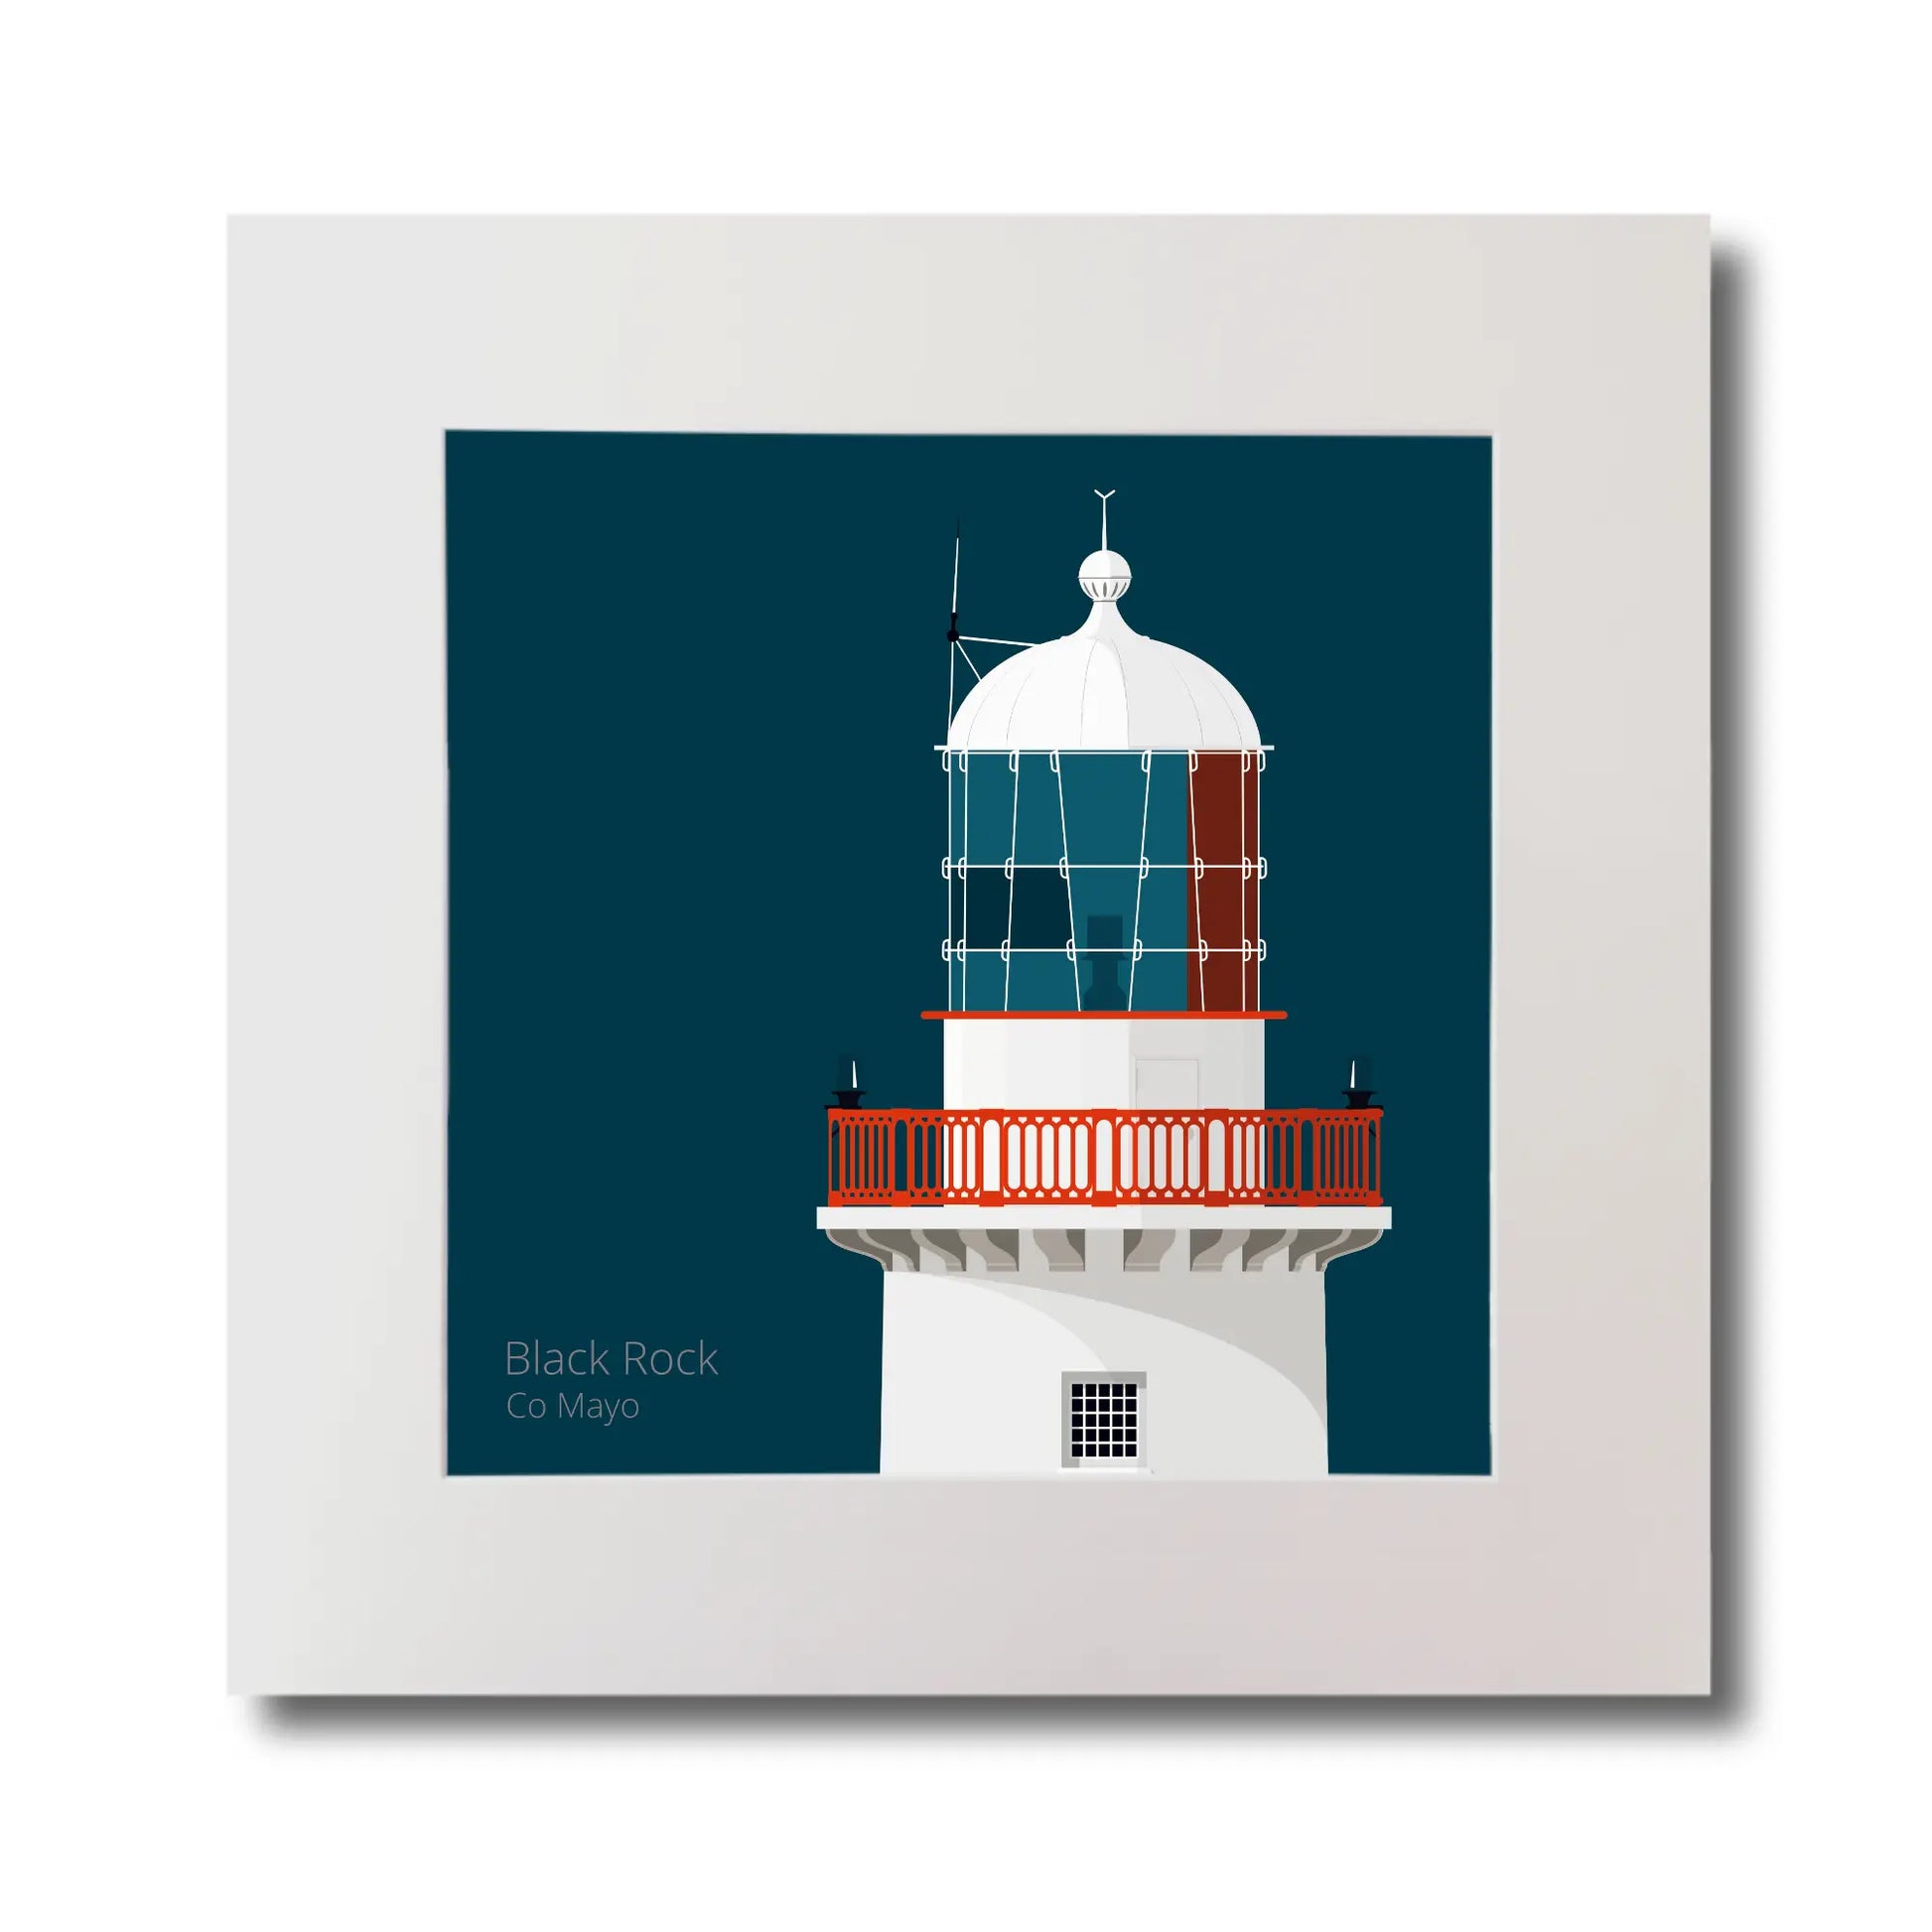 Illustration of Black Rock lighthouse on a midnight blue background, mounted and measuring 30x30cm.